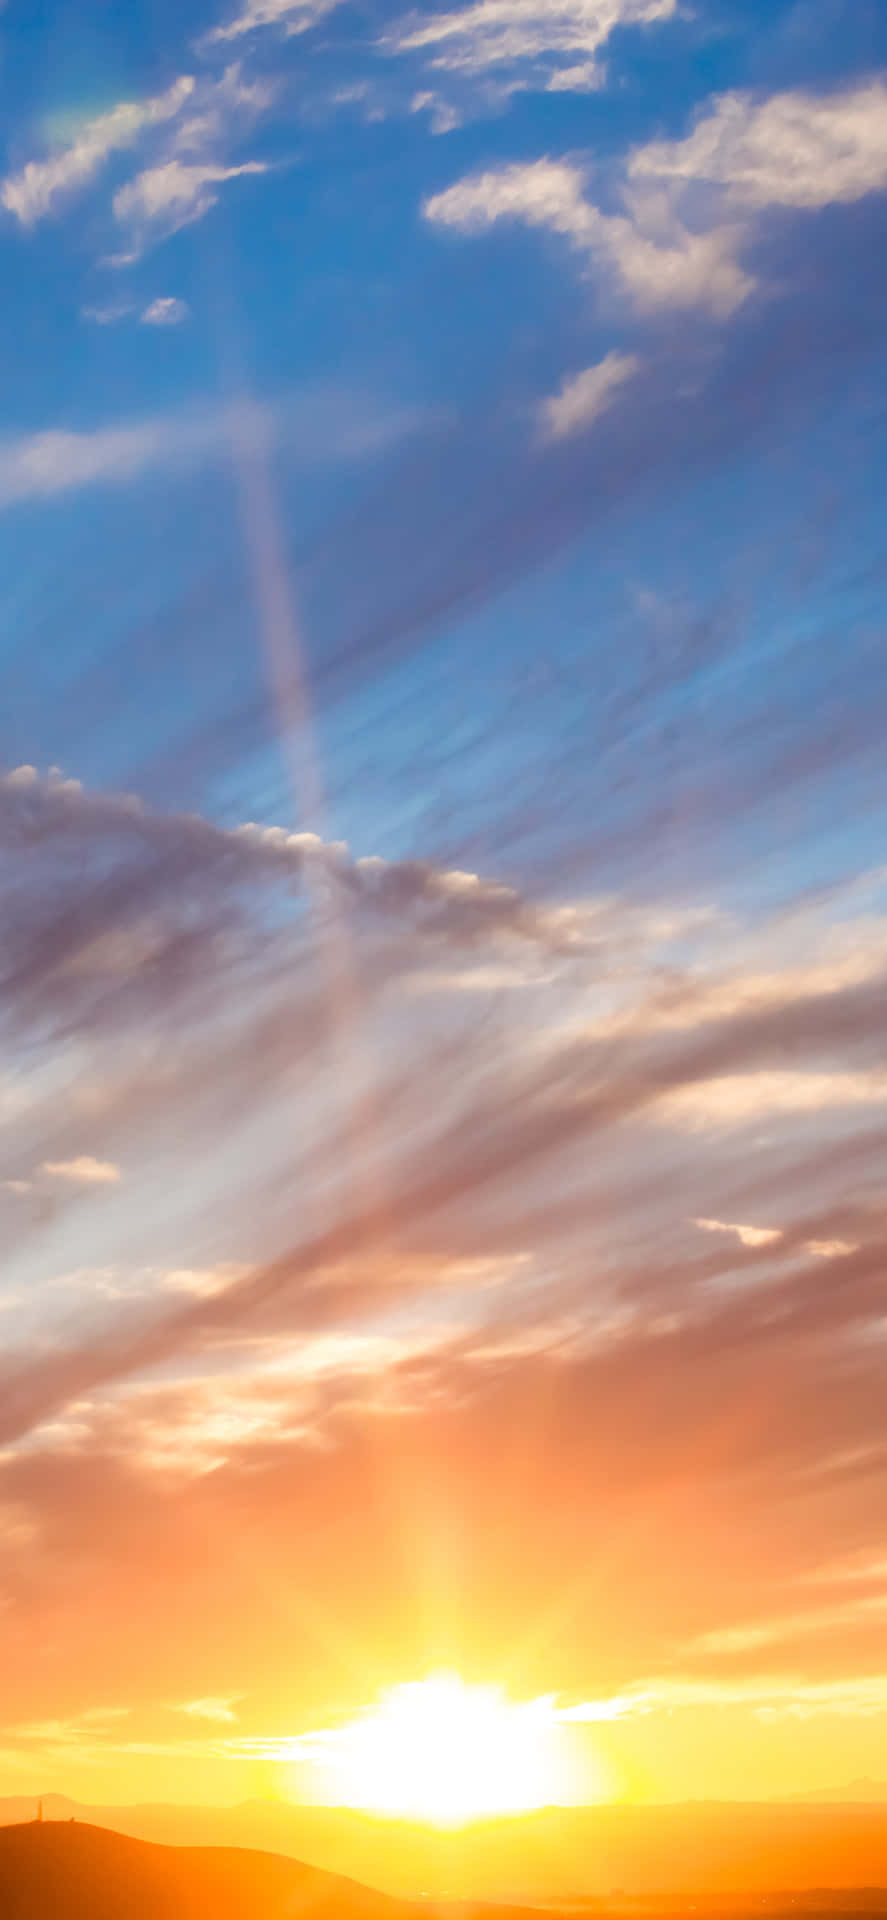 Watch an amazing sunrise on your iPhone Wallpaper